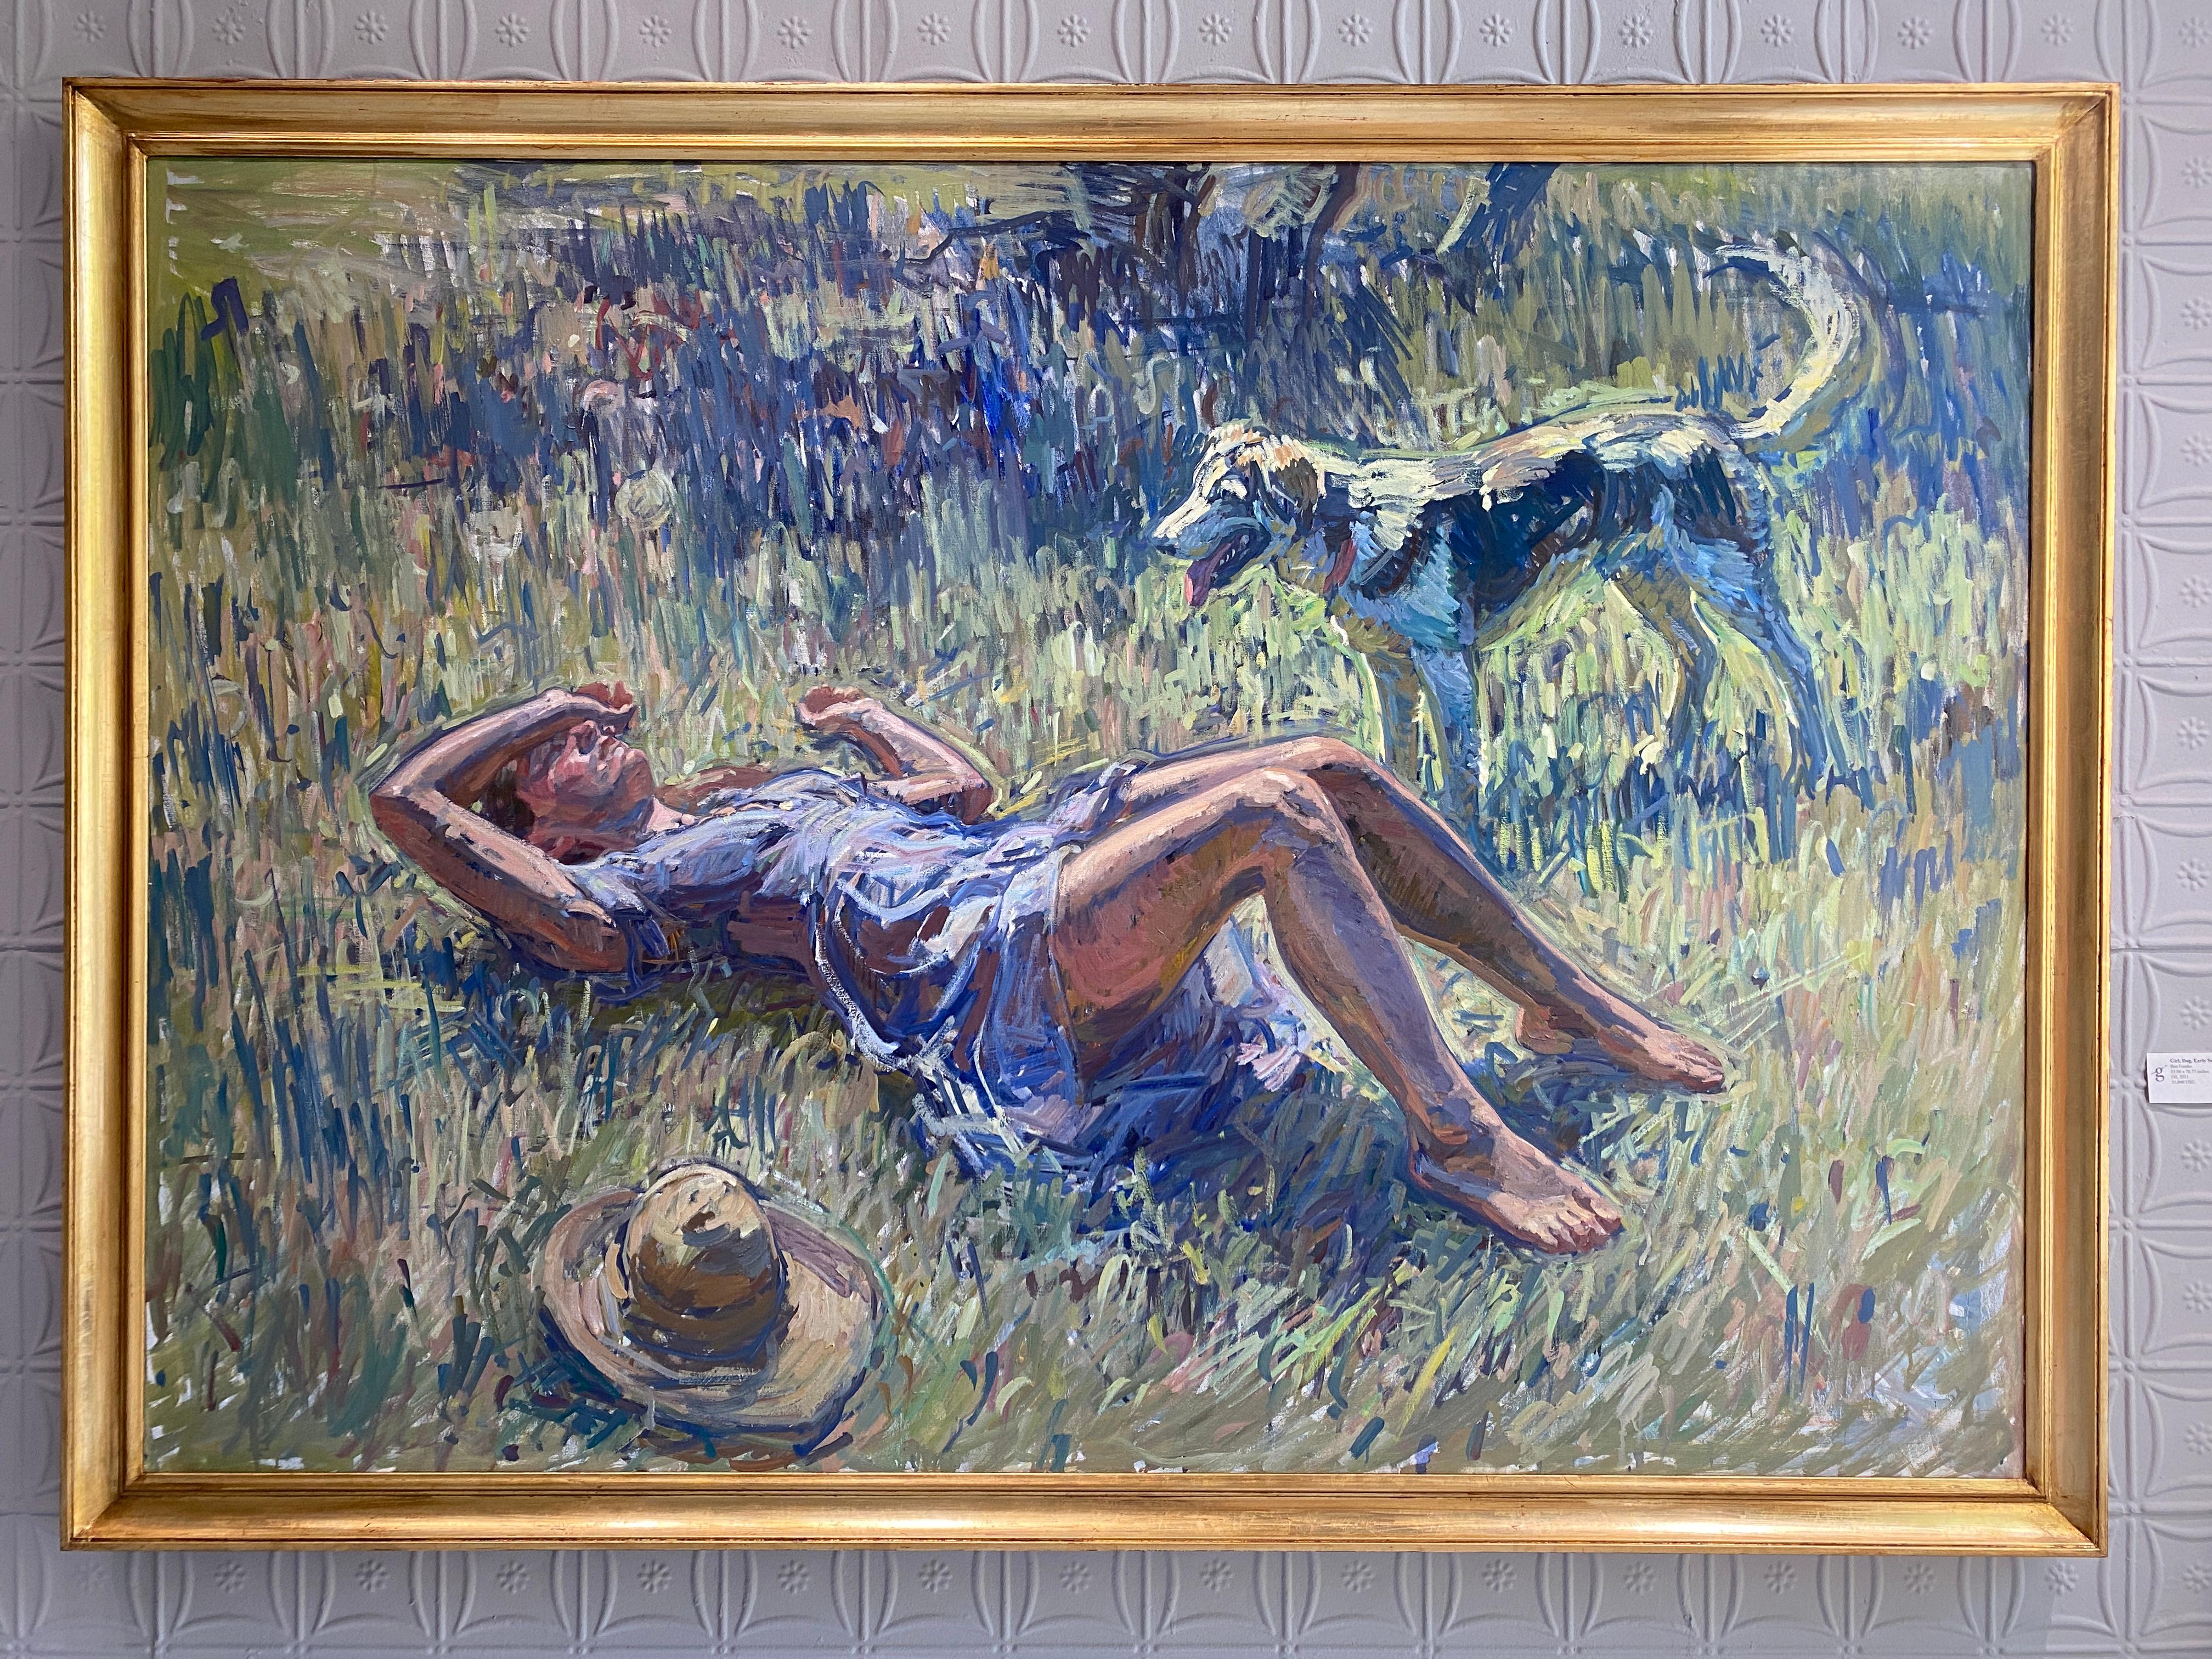 Girl, Dog, Early Summer - Painting by Ben Fenske